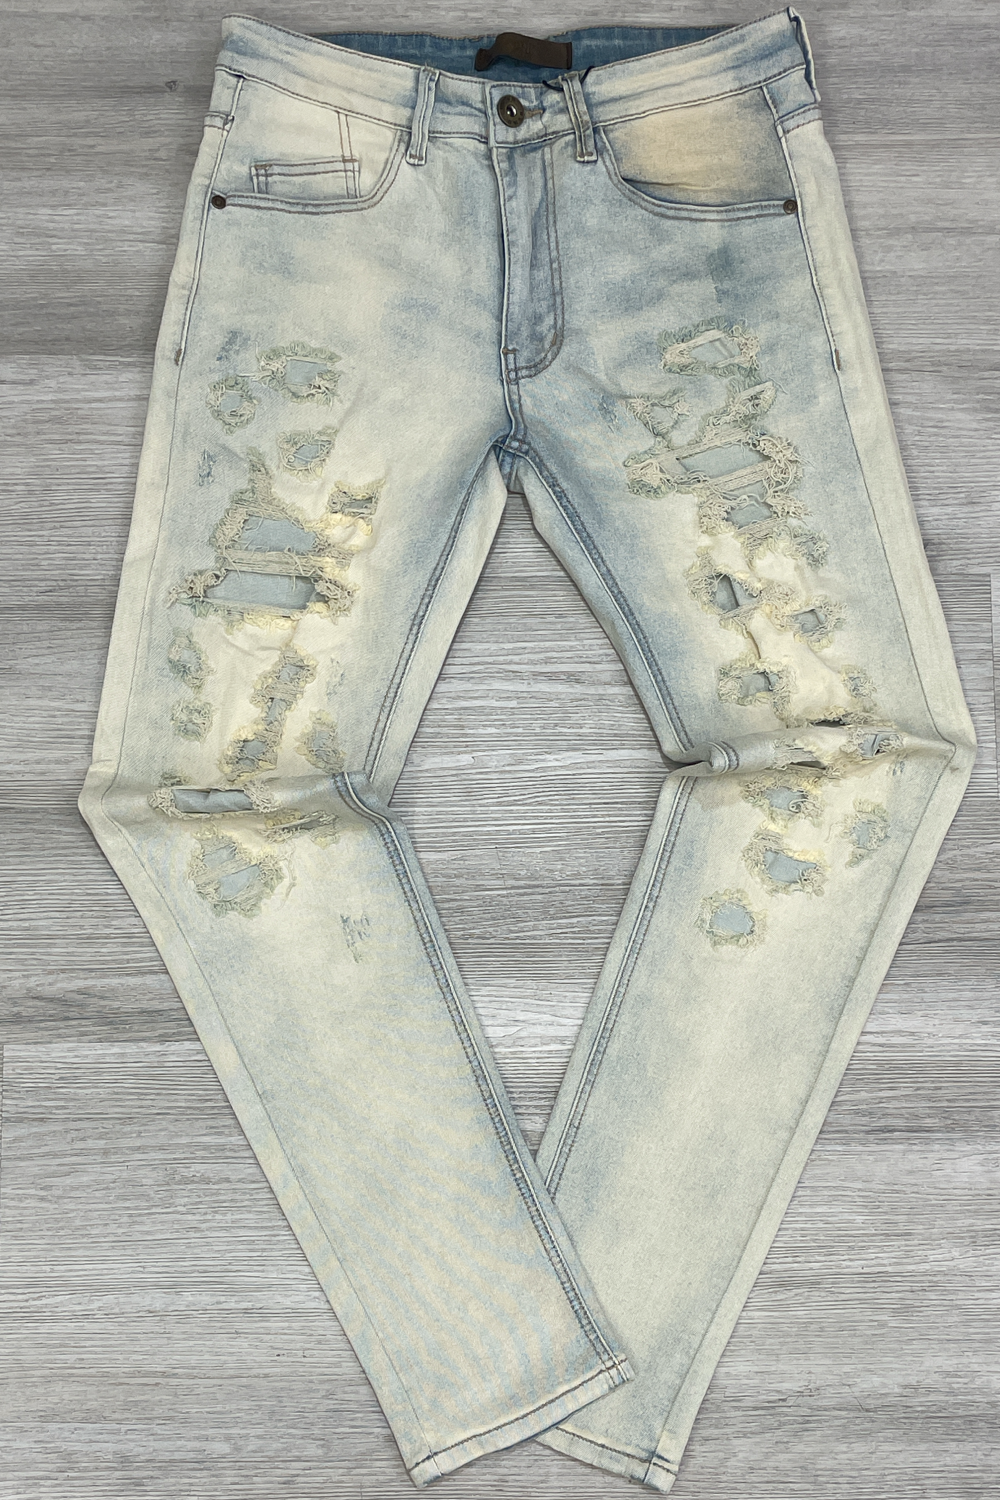 KDNK - ankle zippered ripped skinny jeans (vintage)